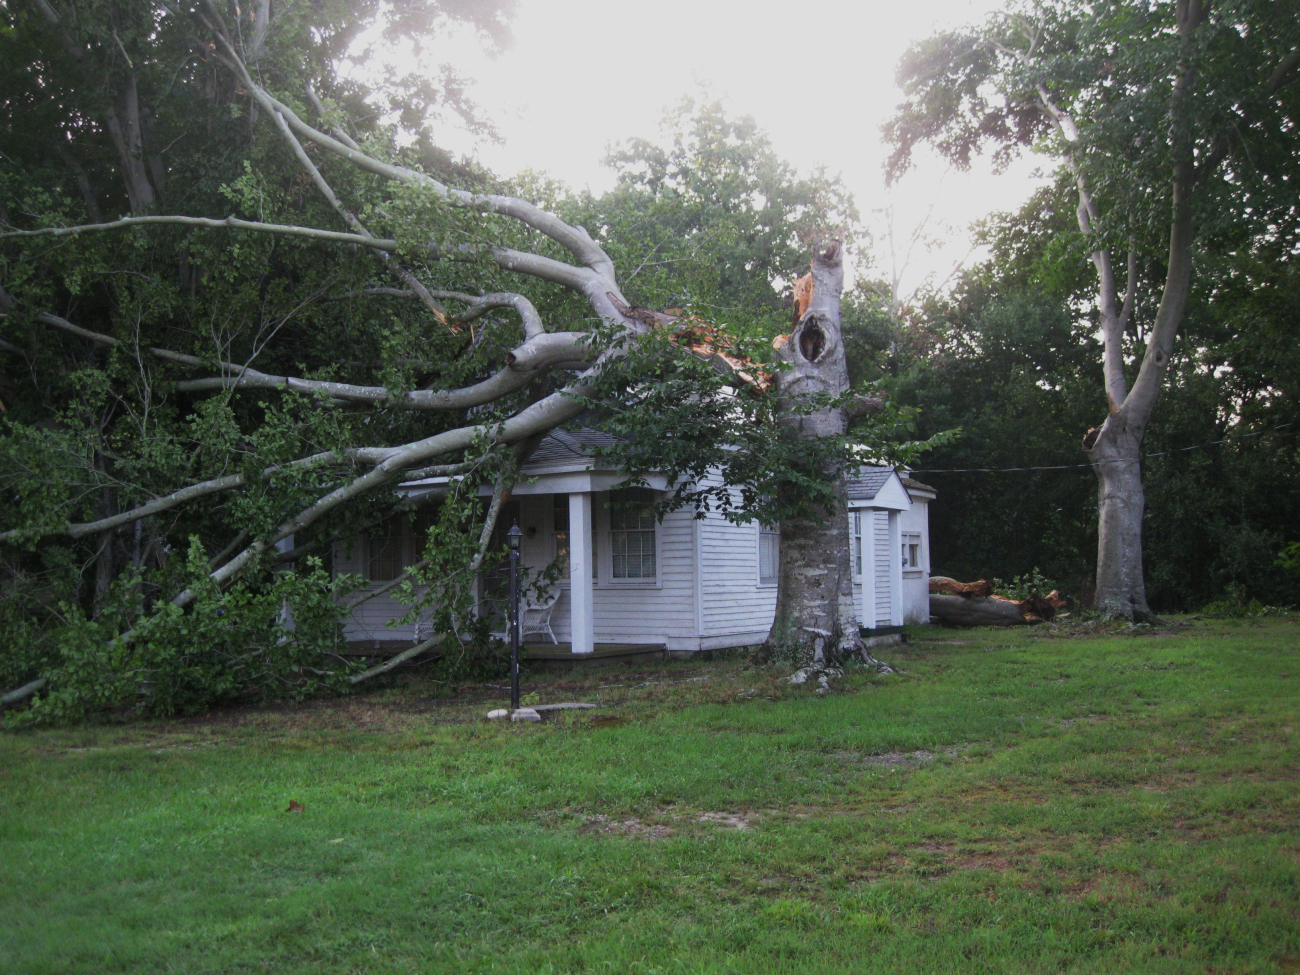 A house is sandwiched between two fallen branches and tree almostmiraculously with no damage to the structure